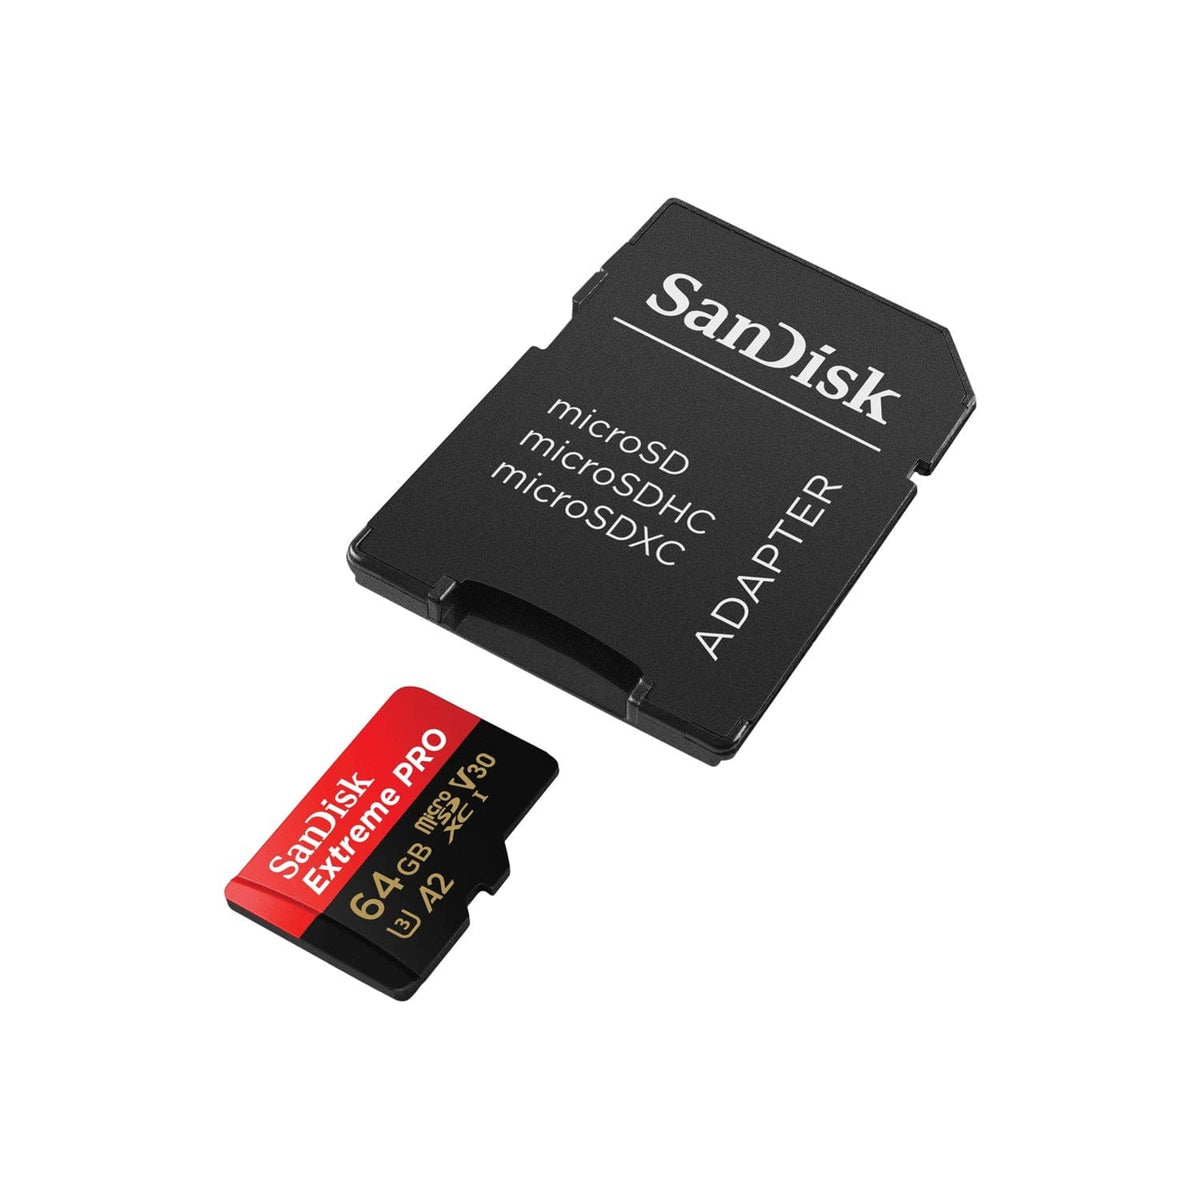 Sandisk Extreme Pro Micro SDXC Memory Card with Adapter 64GB